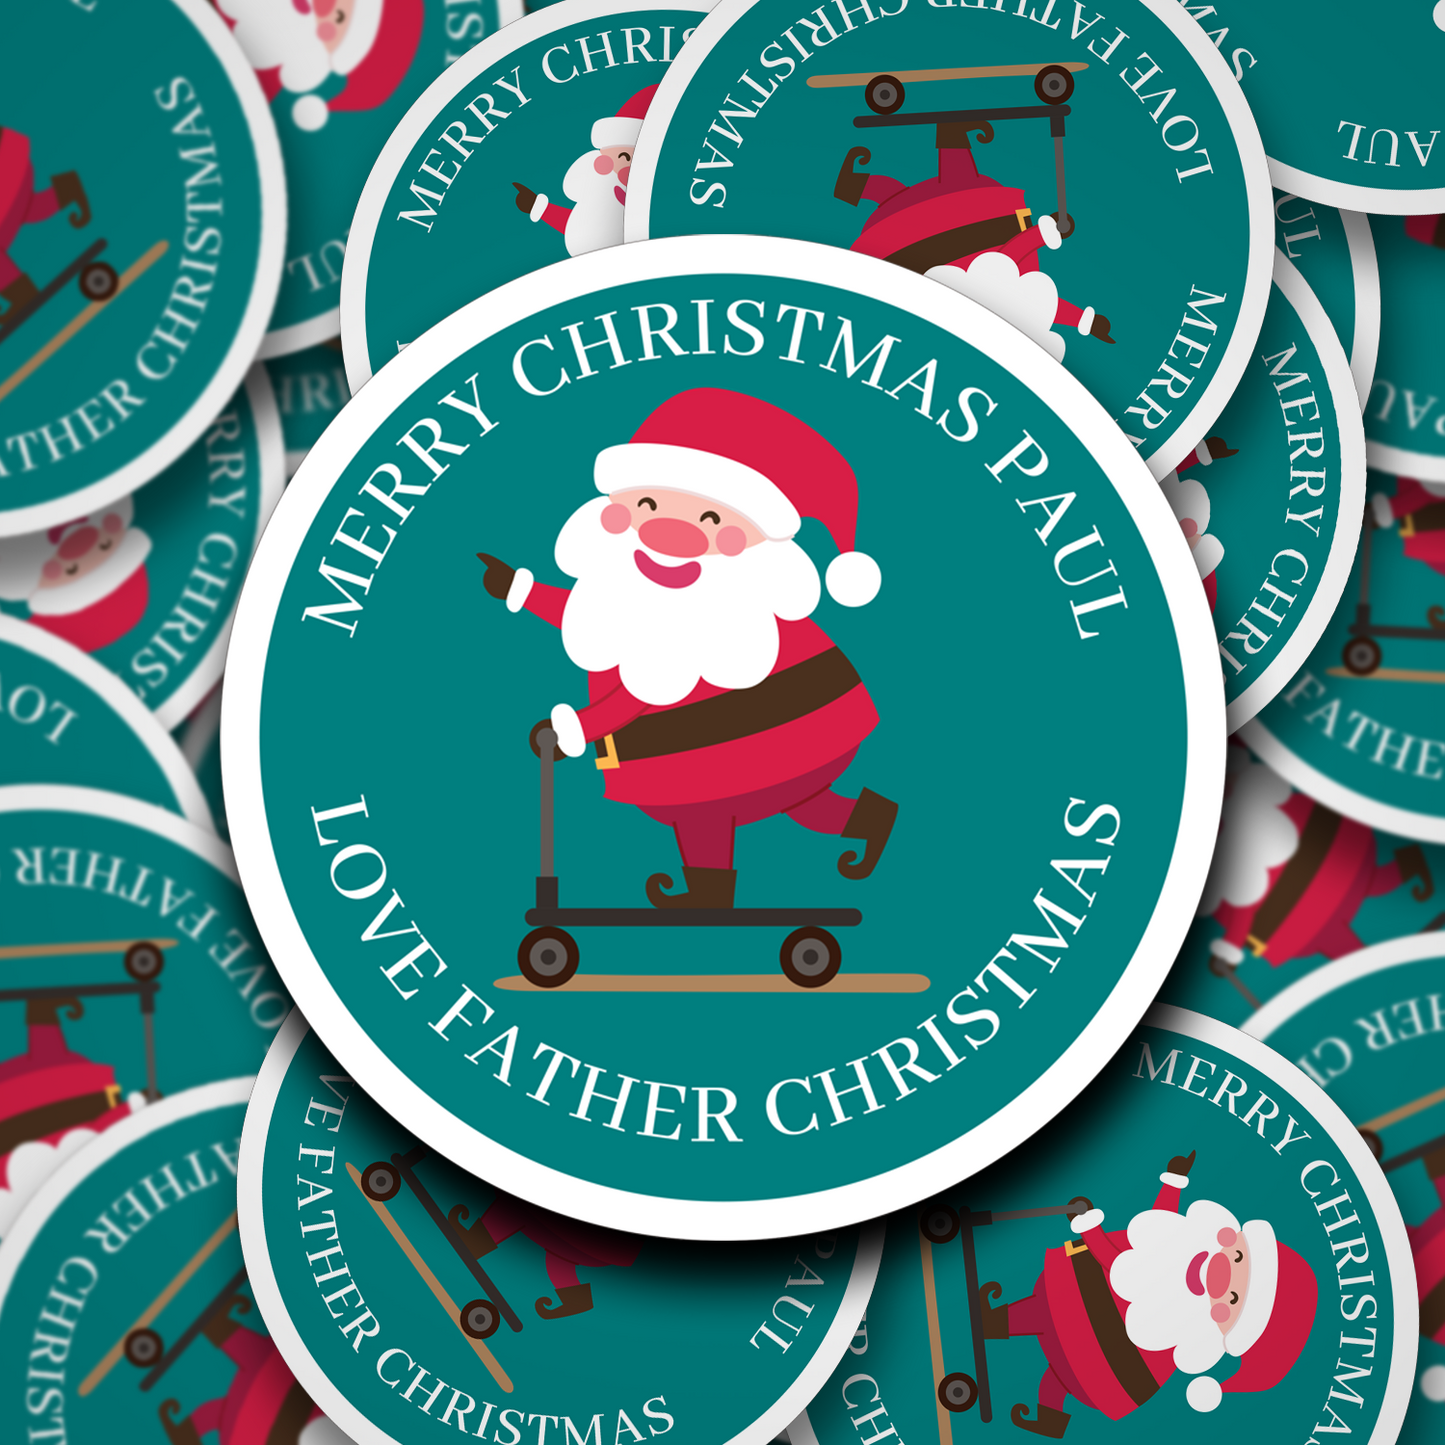 Father Christmas personalised stickers - 4 Colour Options